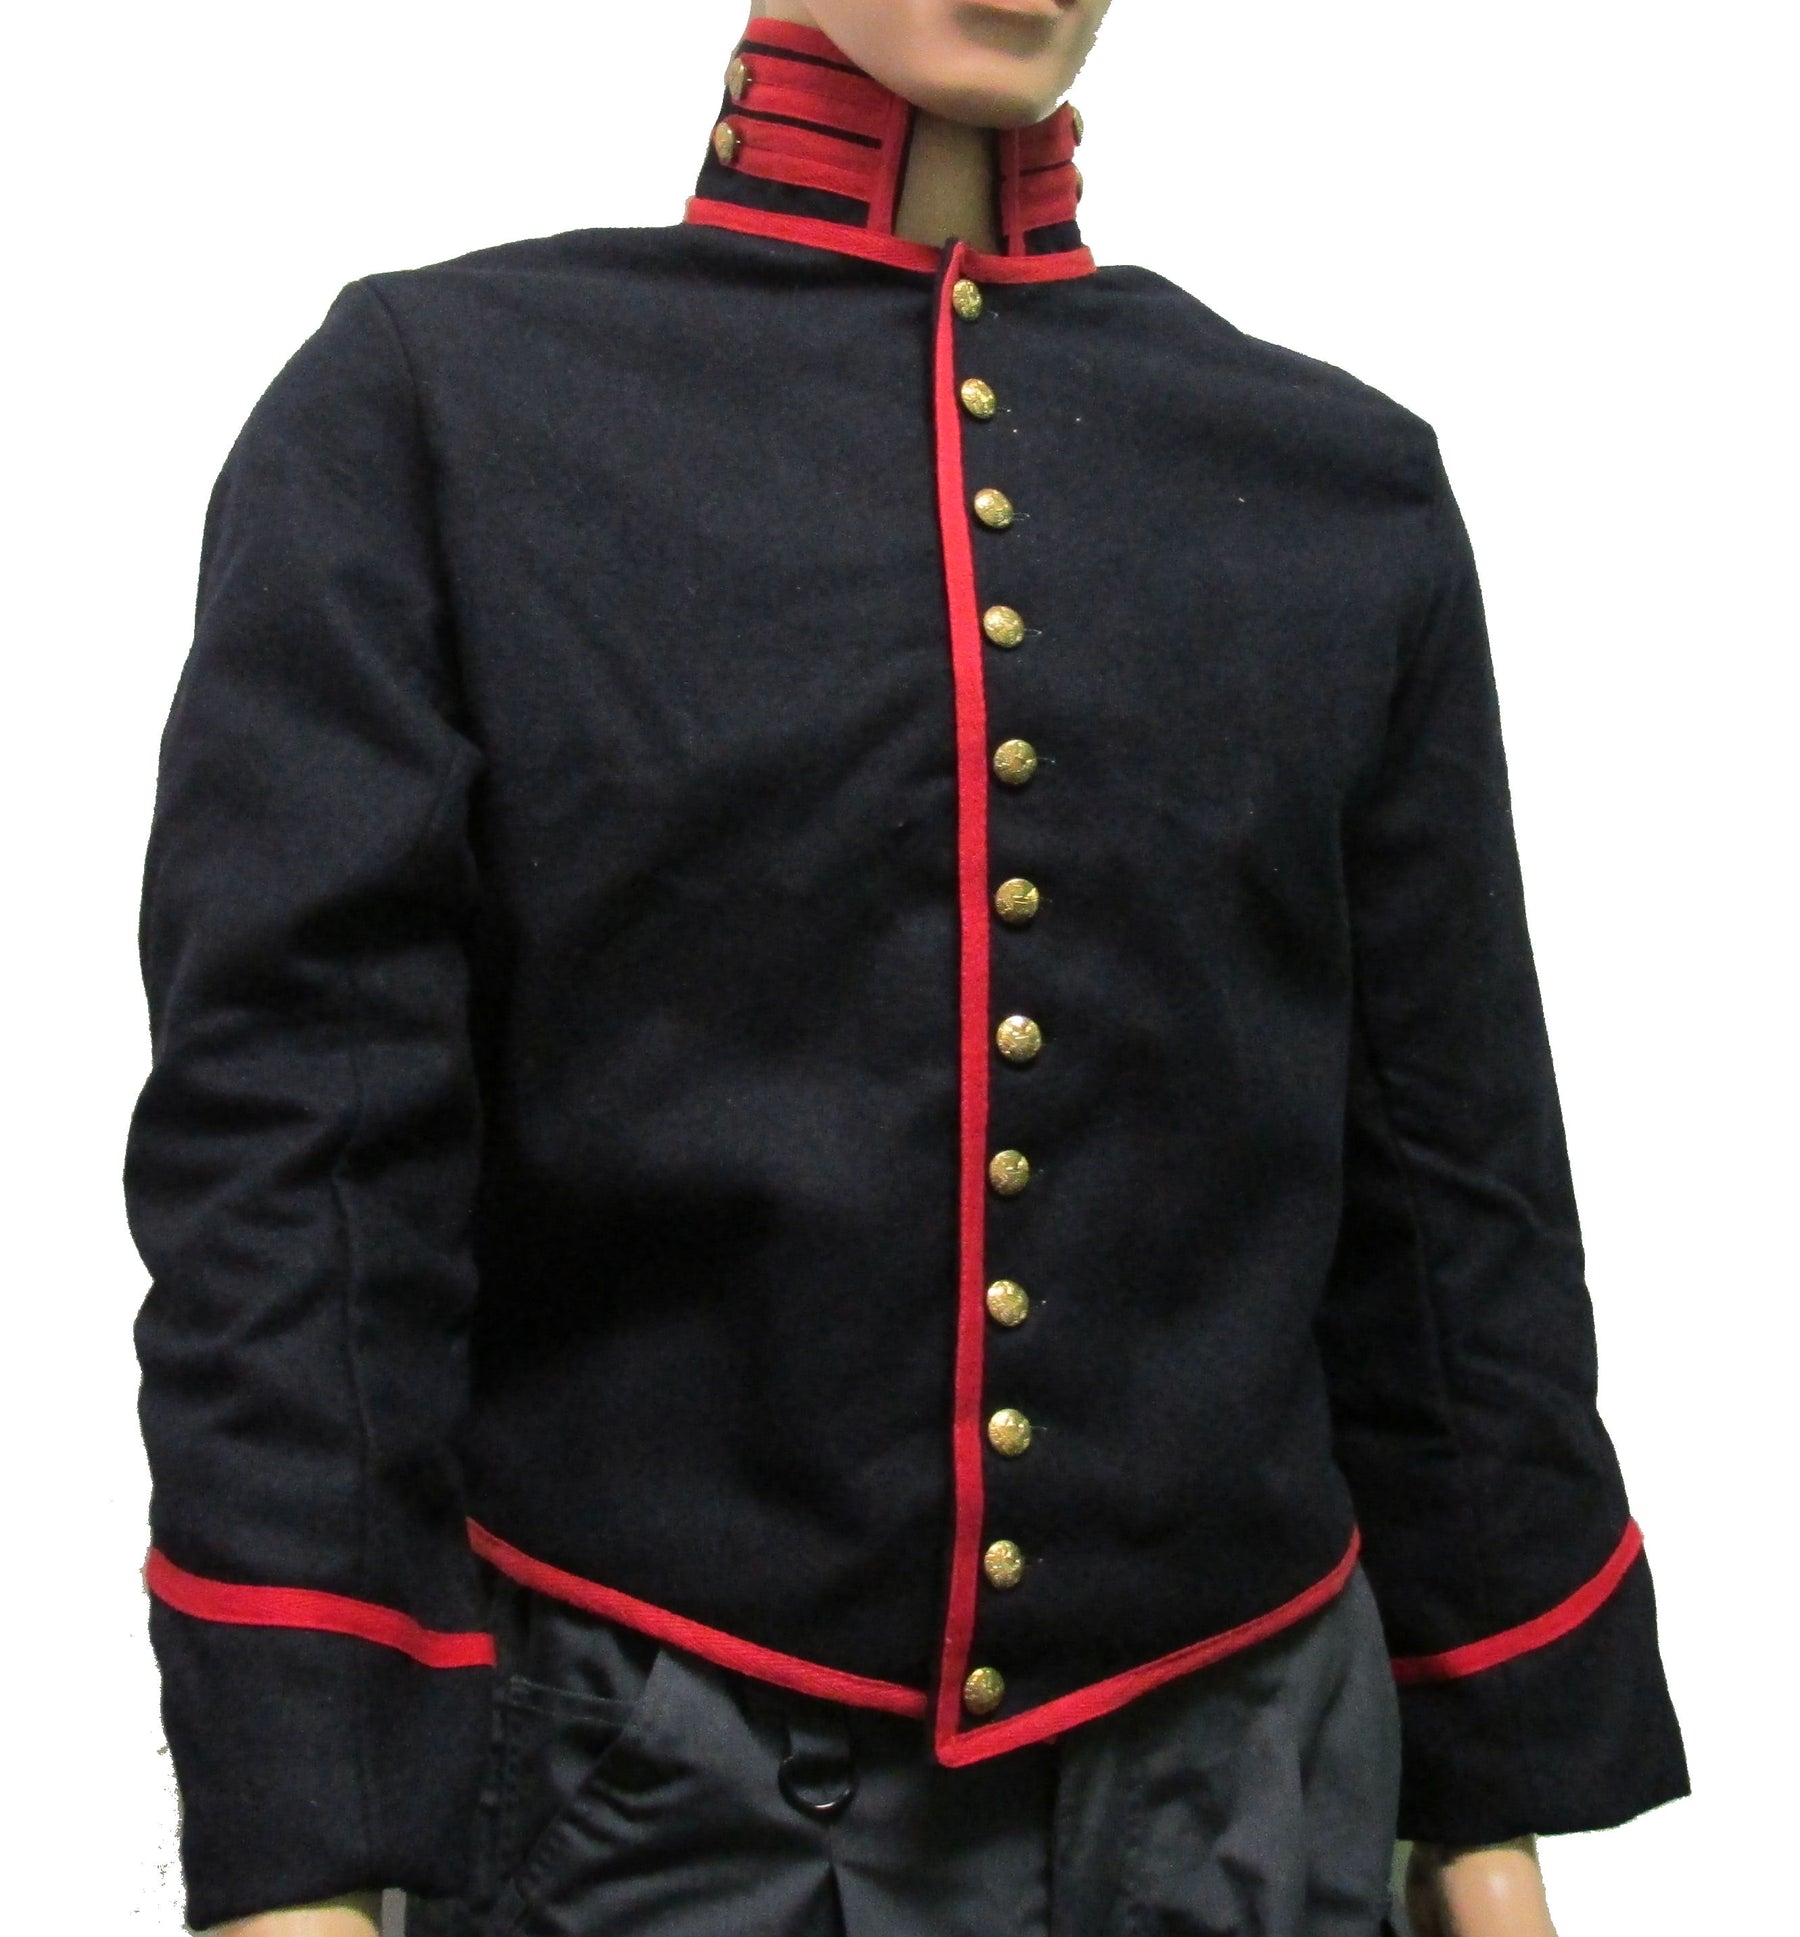 Historical Reenactment Uniforms and Gear